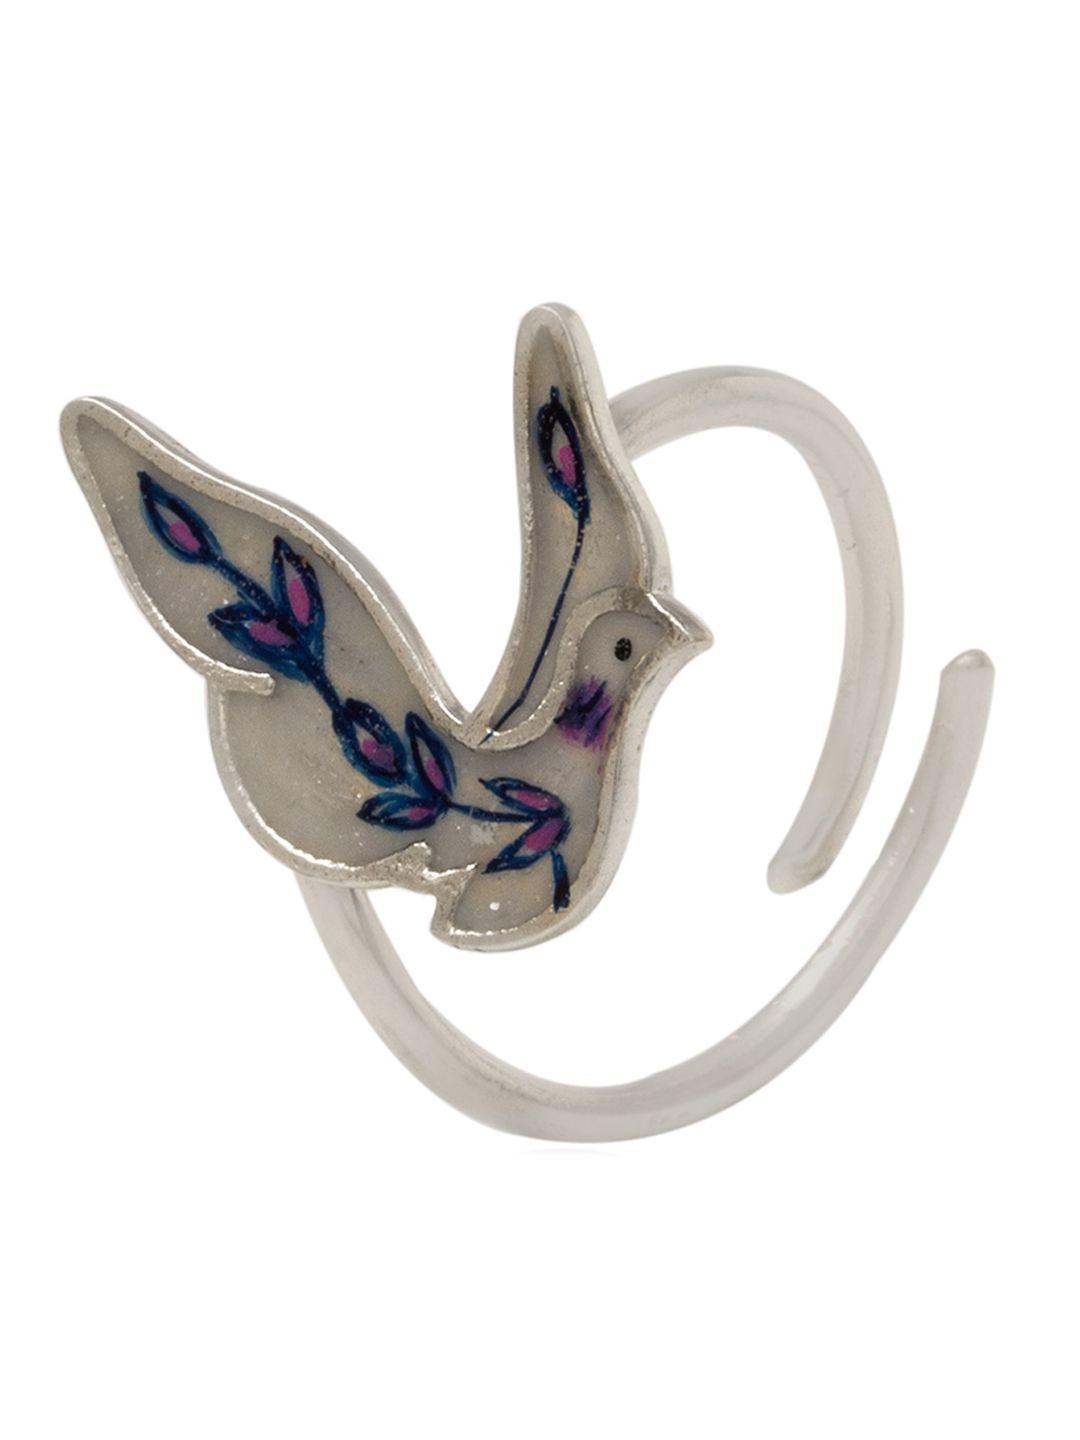 kicky and perky silver plated enamel bird adjustable ring